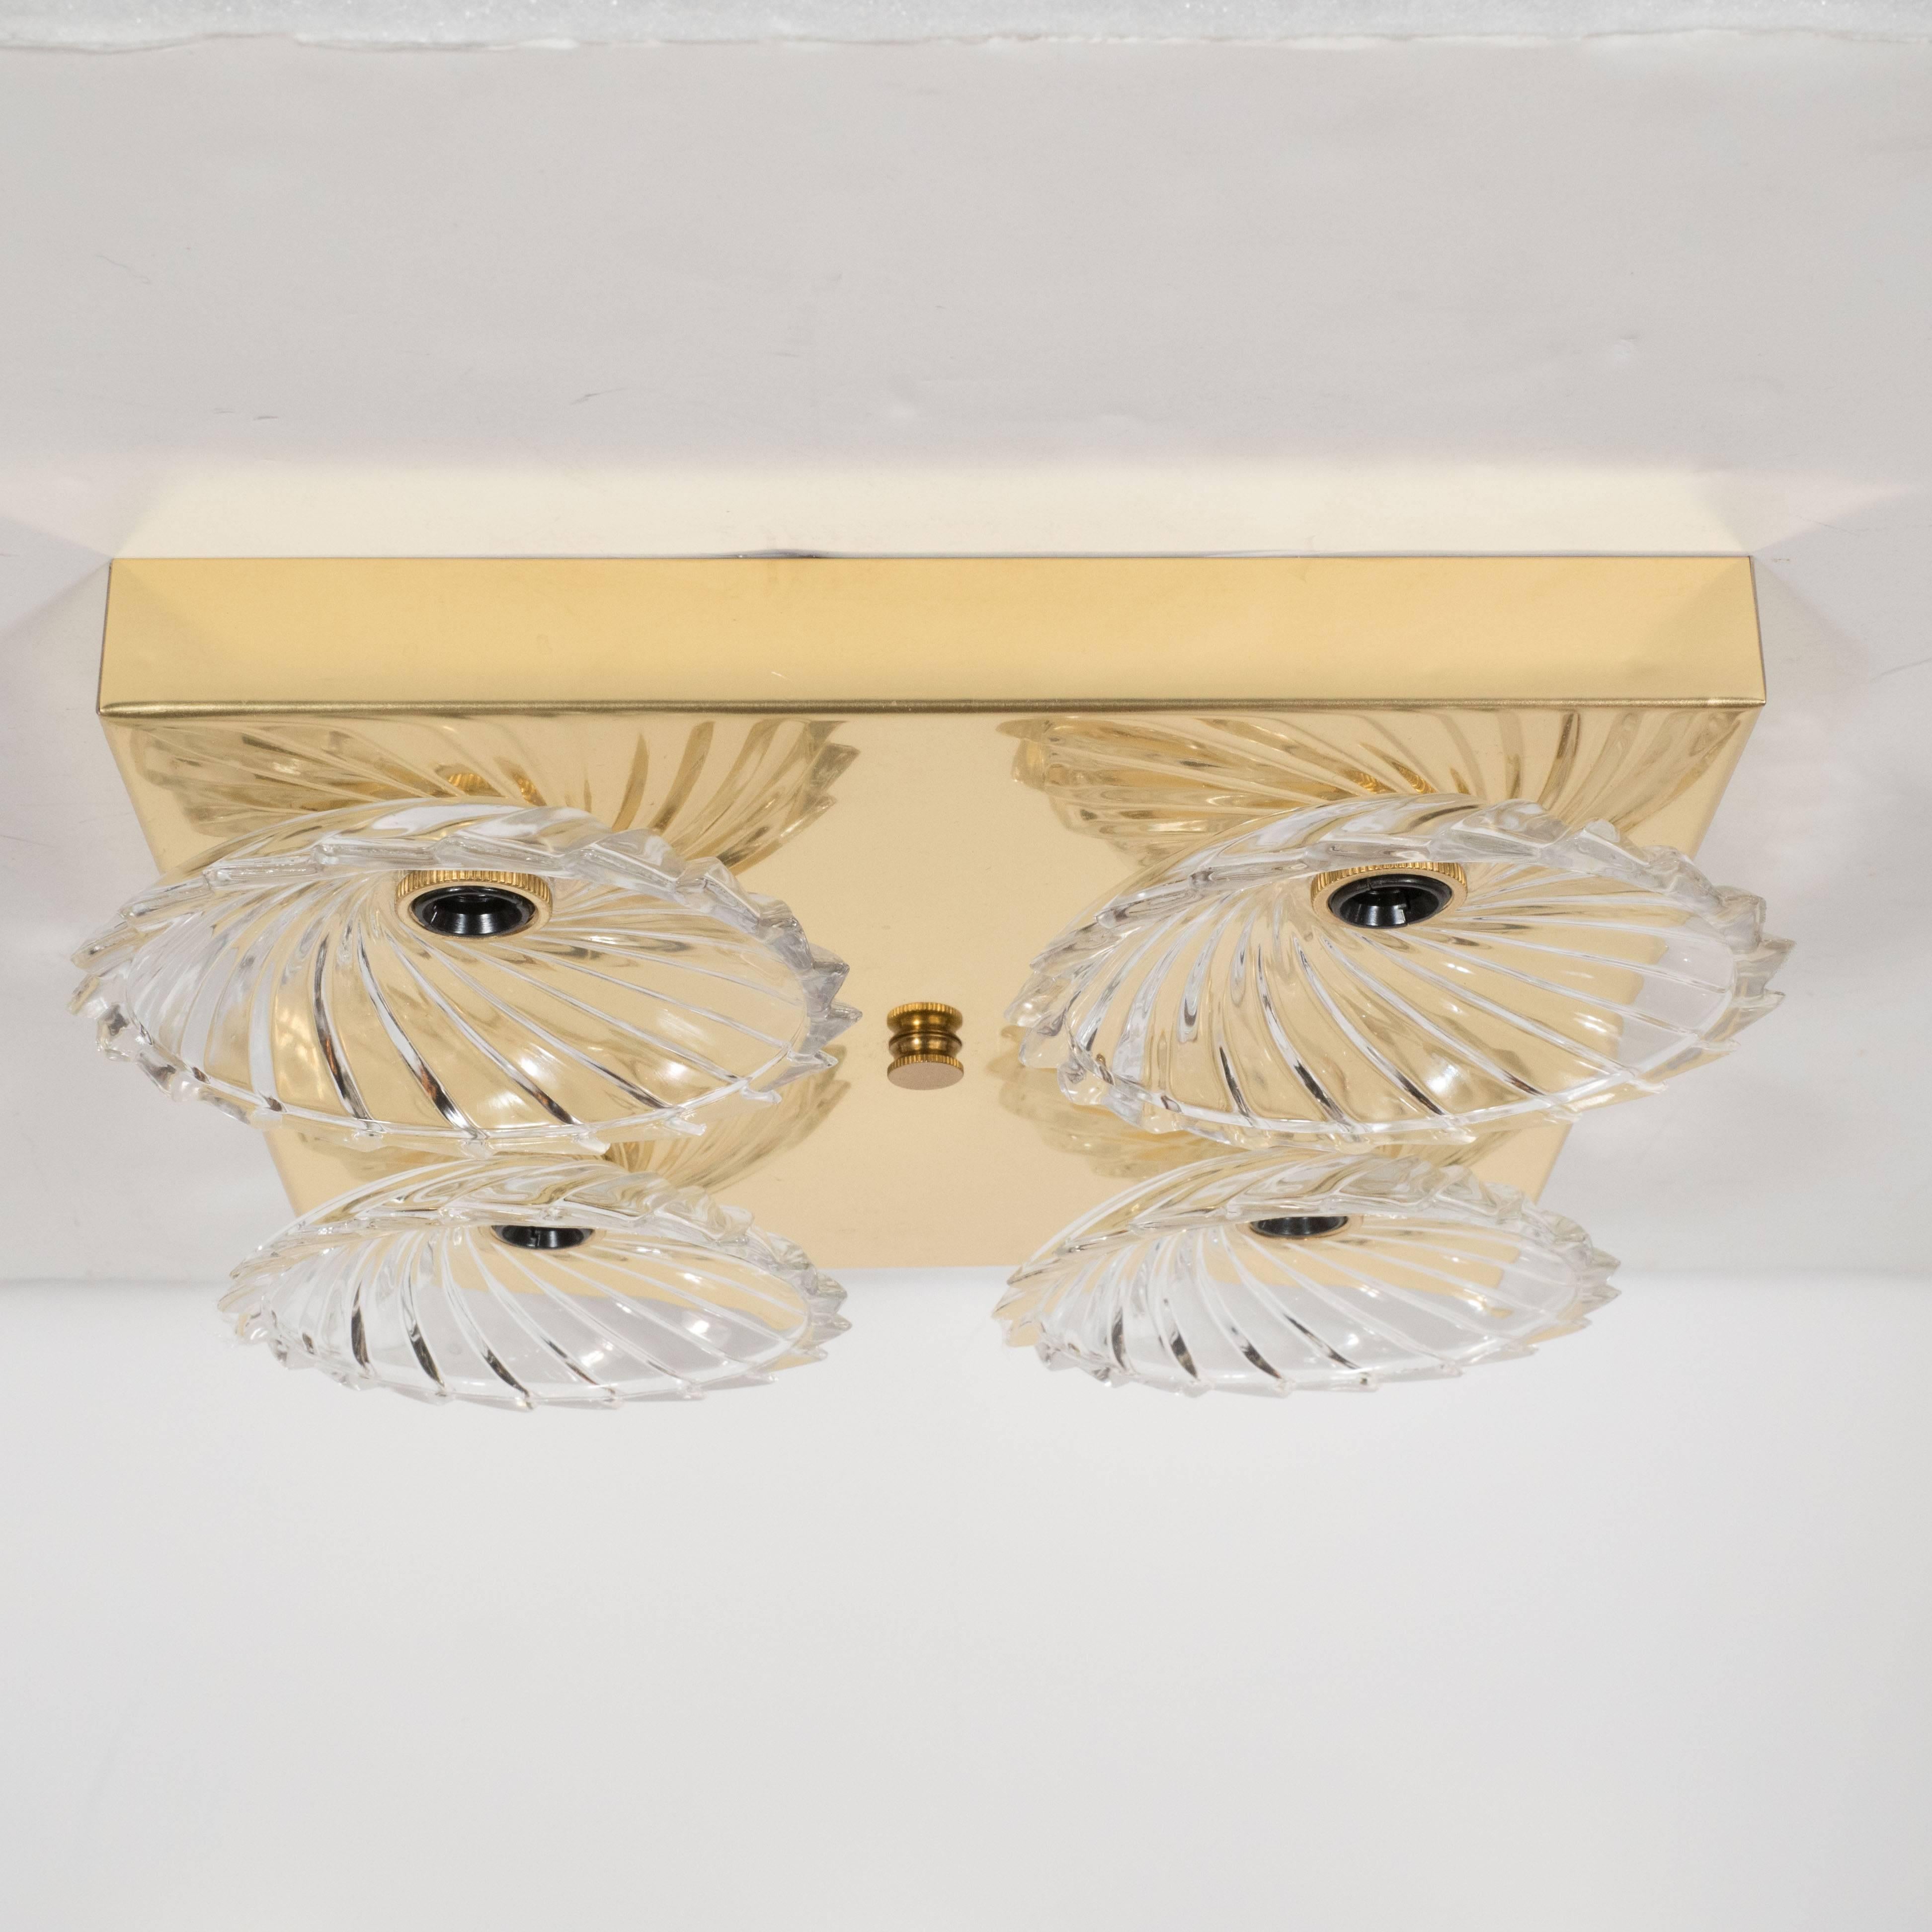 Late 20th Century Pair of Mid-Century Modern Flush Mount with Bobeche Glass Shades